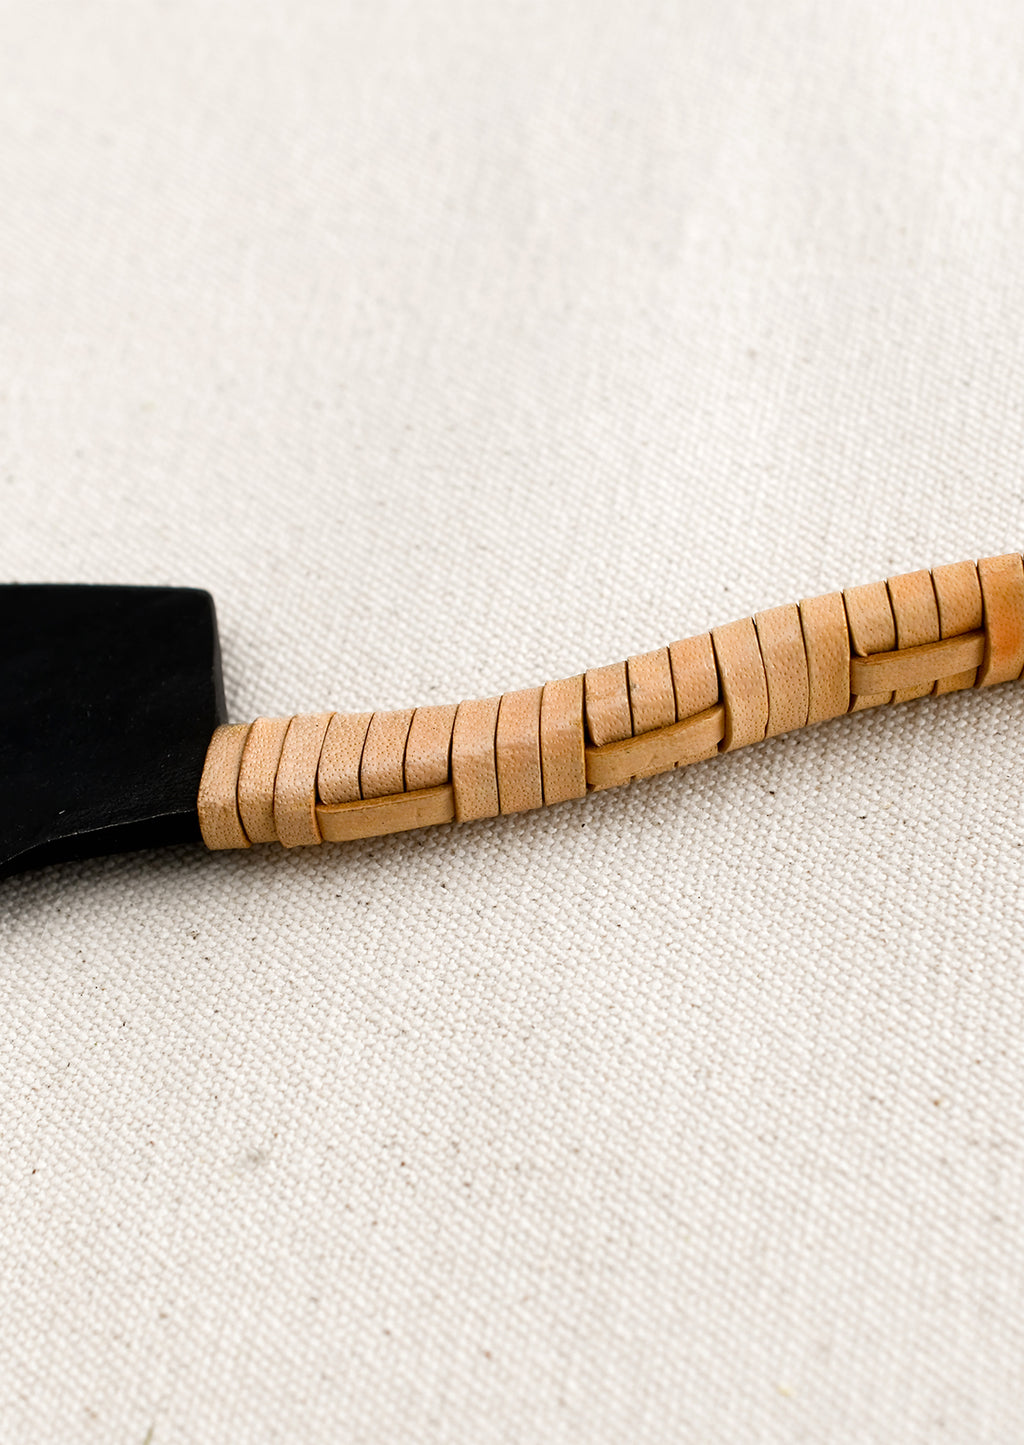 2: A black cast iron knife with natural leather wrapped handle.